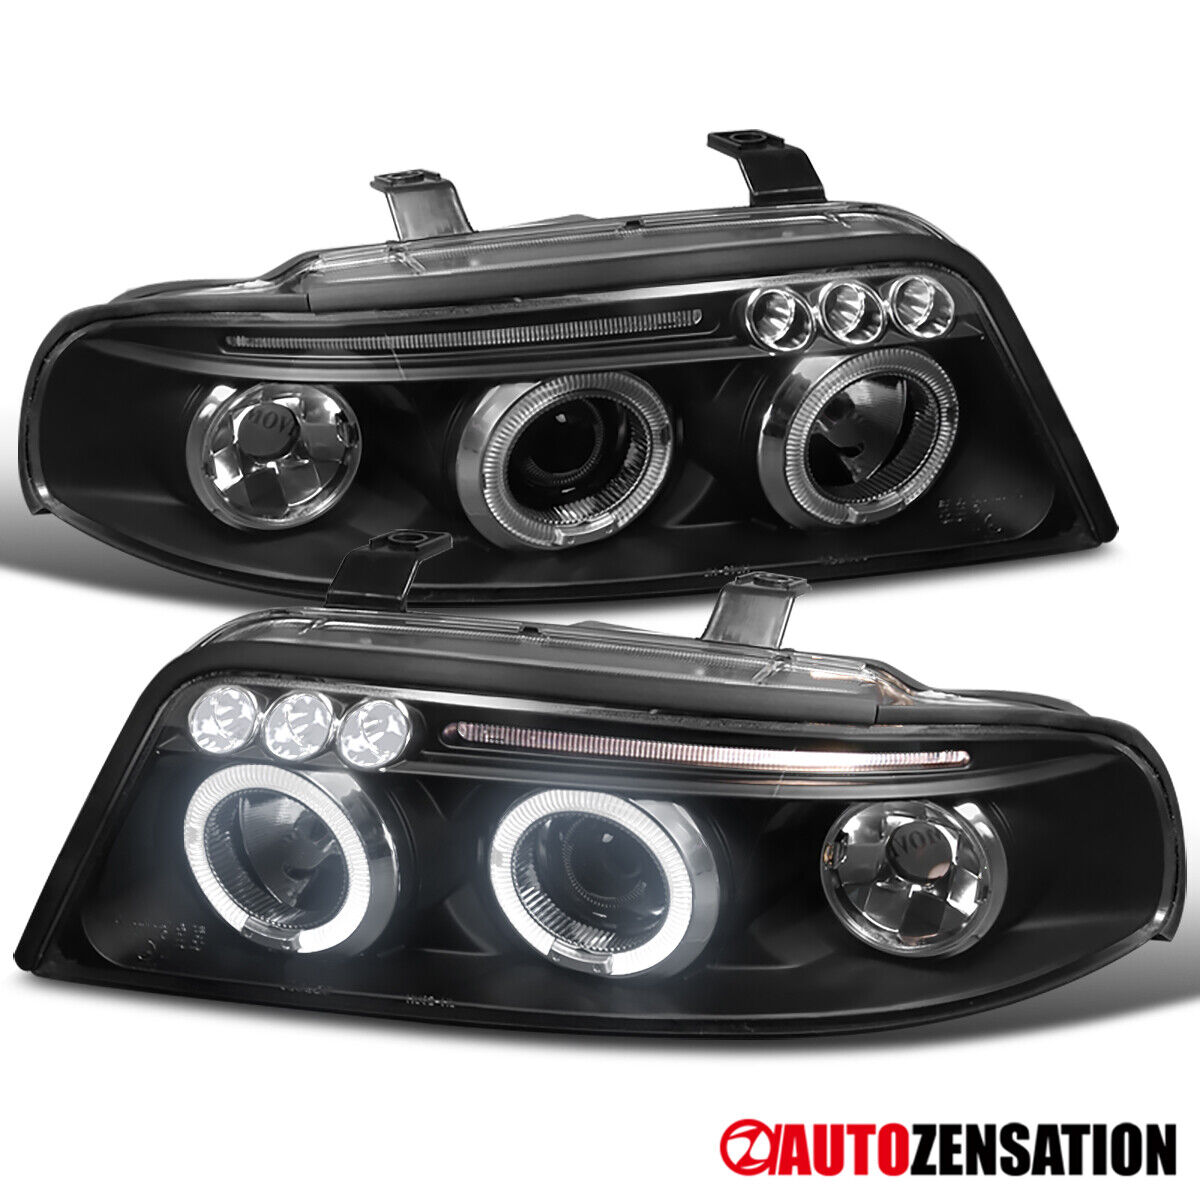 For 1999-2001 Audi A4 S4 B5 Black LED Halo Projector Headlights Lamps Left+Right